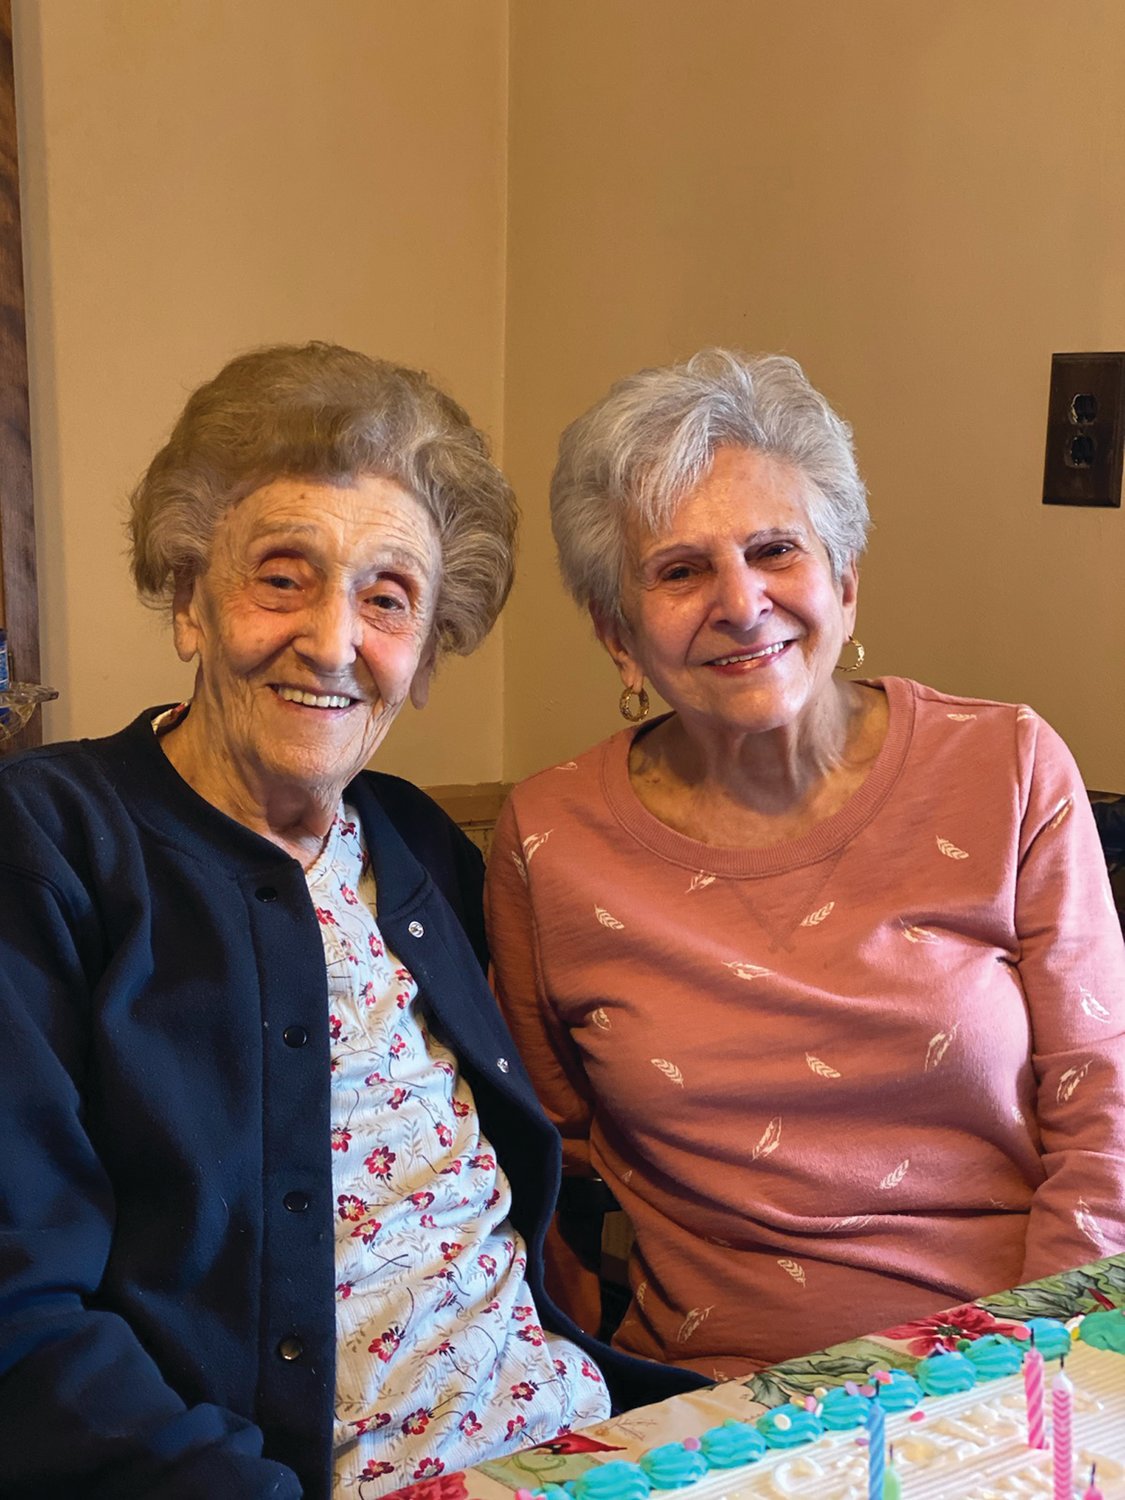 BIG PARTY: On Sunday, about 25 friends and family packed Celentano’s Binghampton Avenue home, where she’s lived her entire life, for a 100th birthday celebration. She posed for a photo with her younger sister Alice Macera, 88.